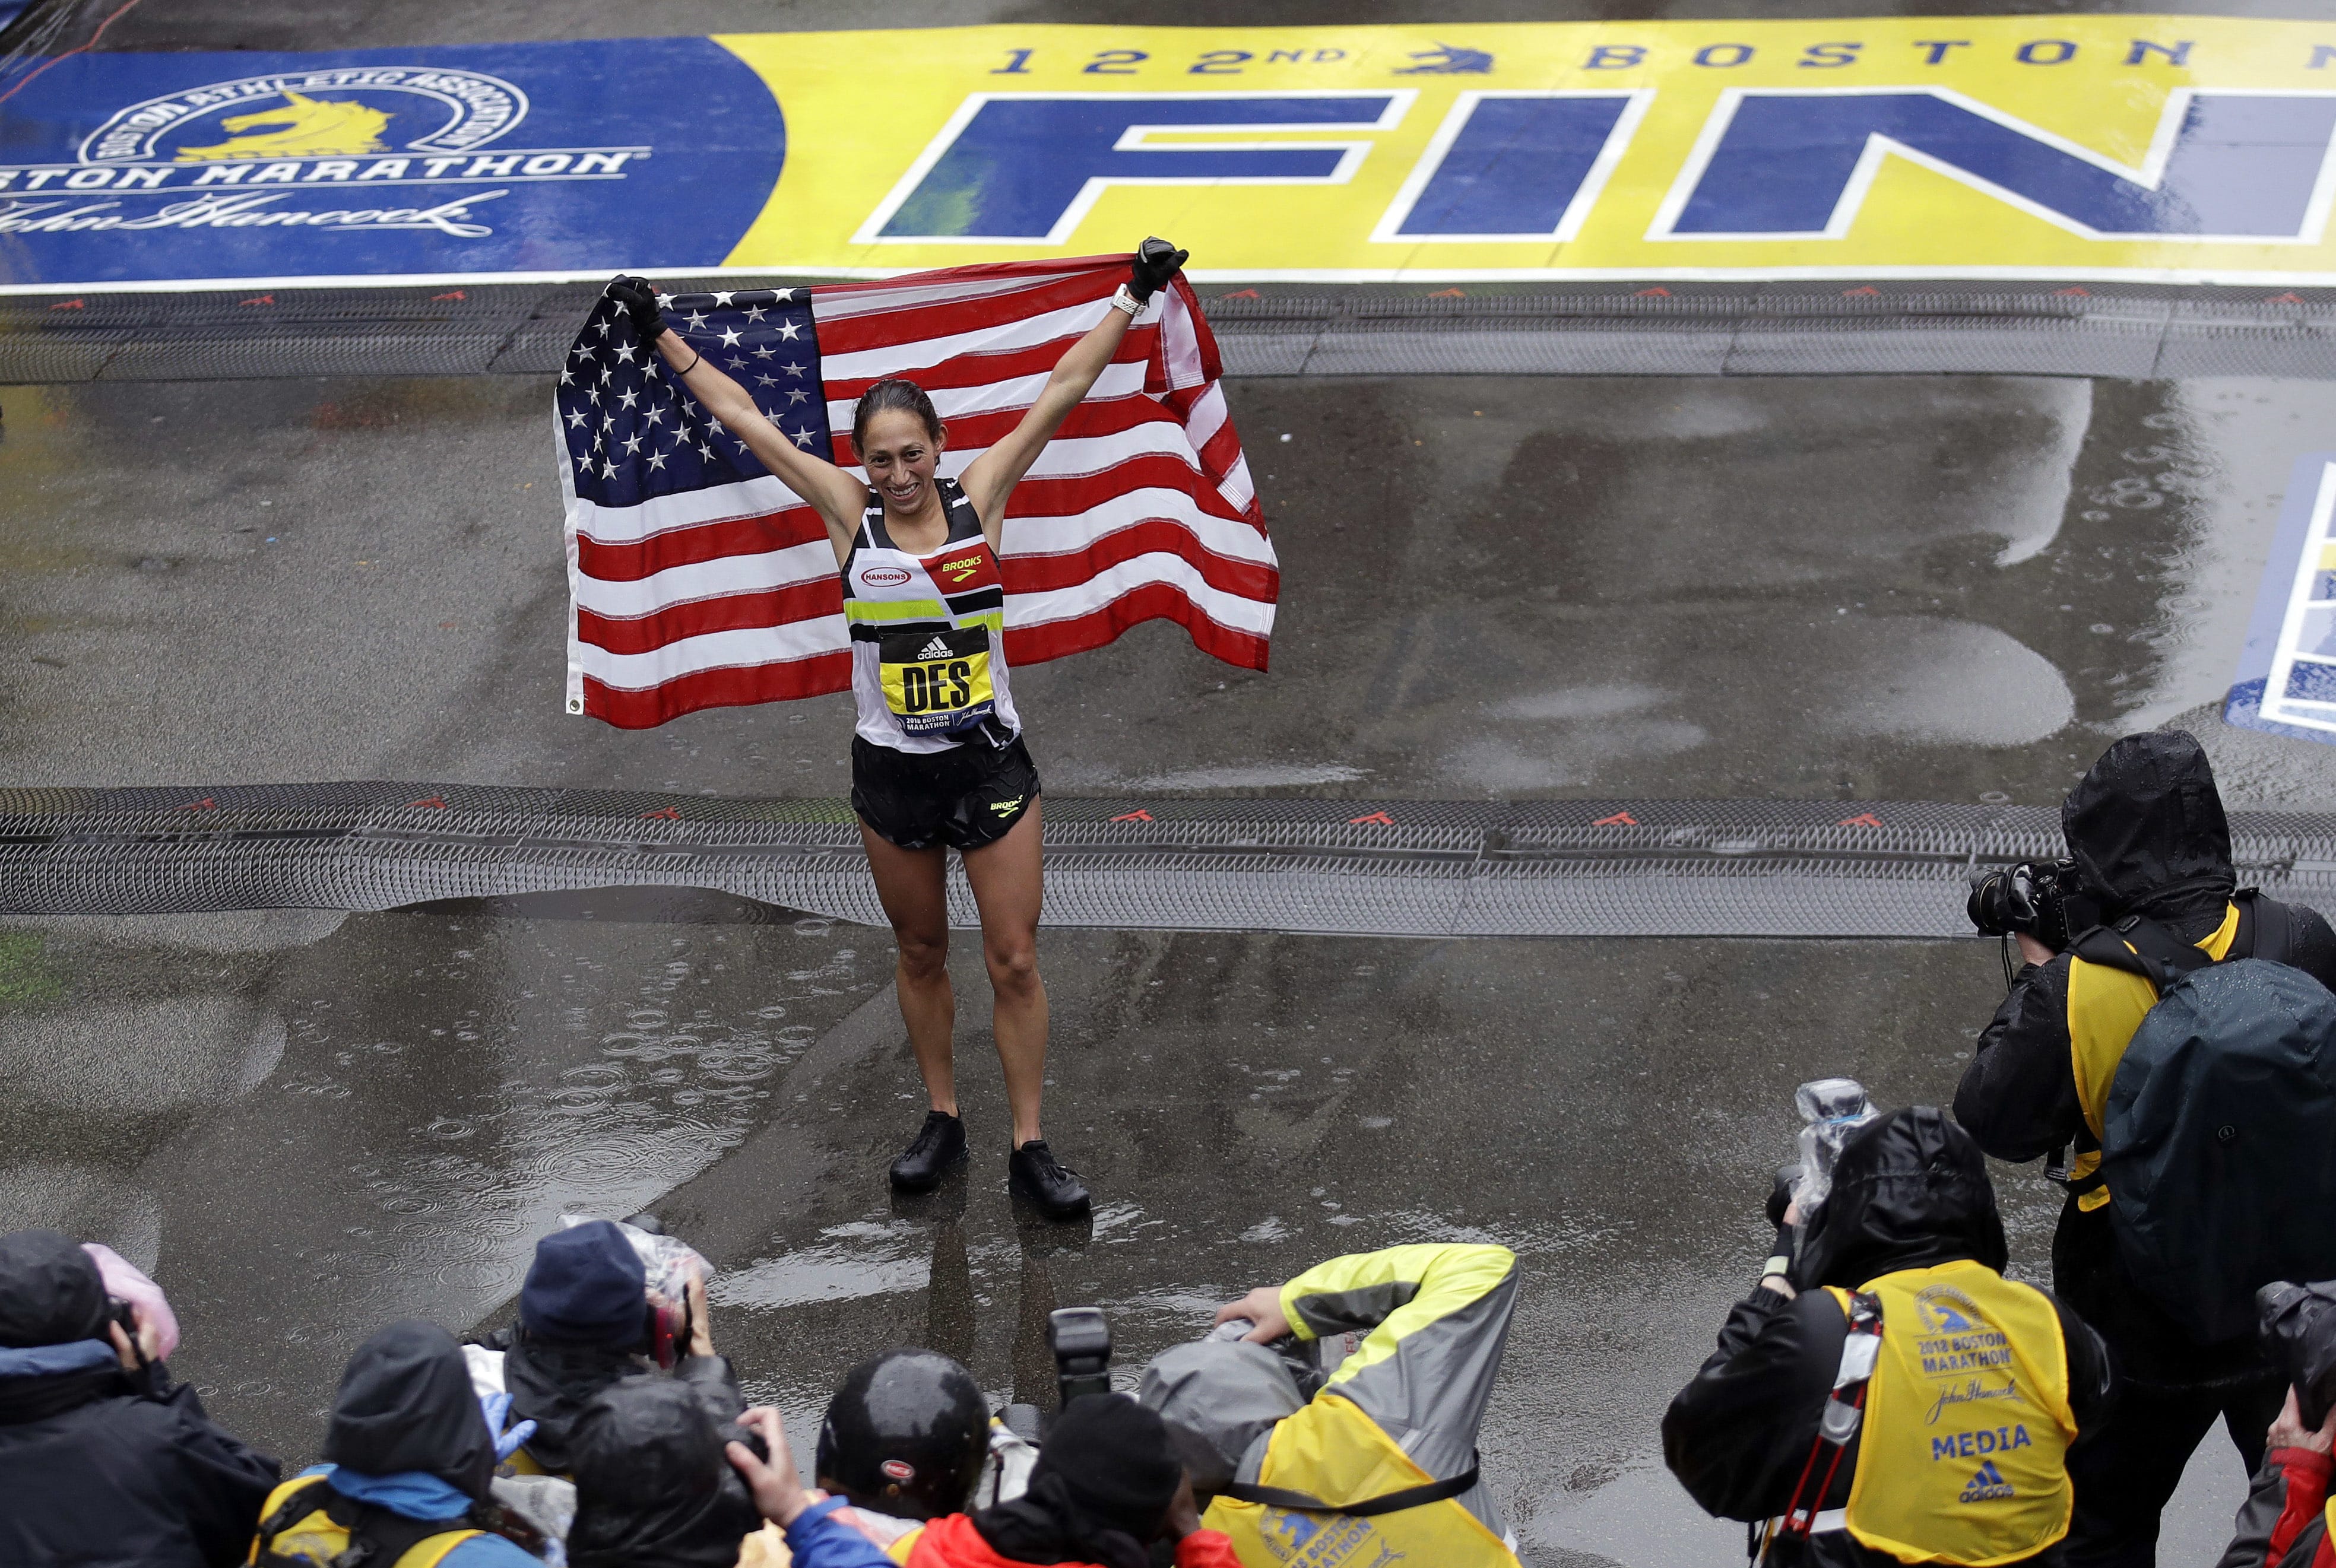 Desiree Linden, of Washington, Mich., celebrates after winning the women's division of the 122nd Boston Marathon on Monday, April 16, 2018, in Boston. She is the first American woman to win the race since 1985.